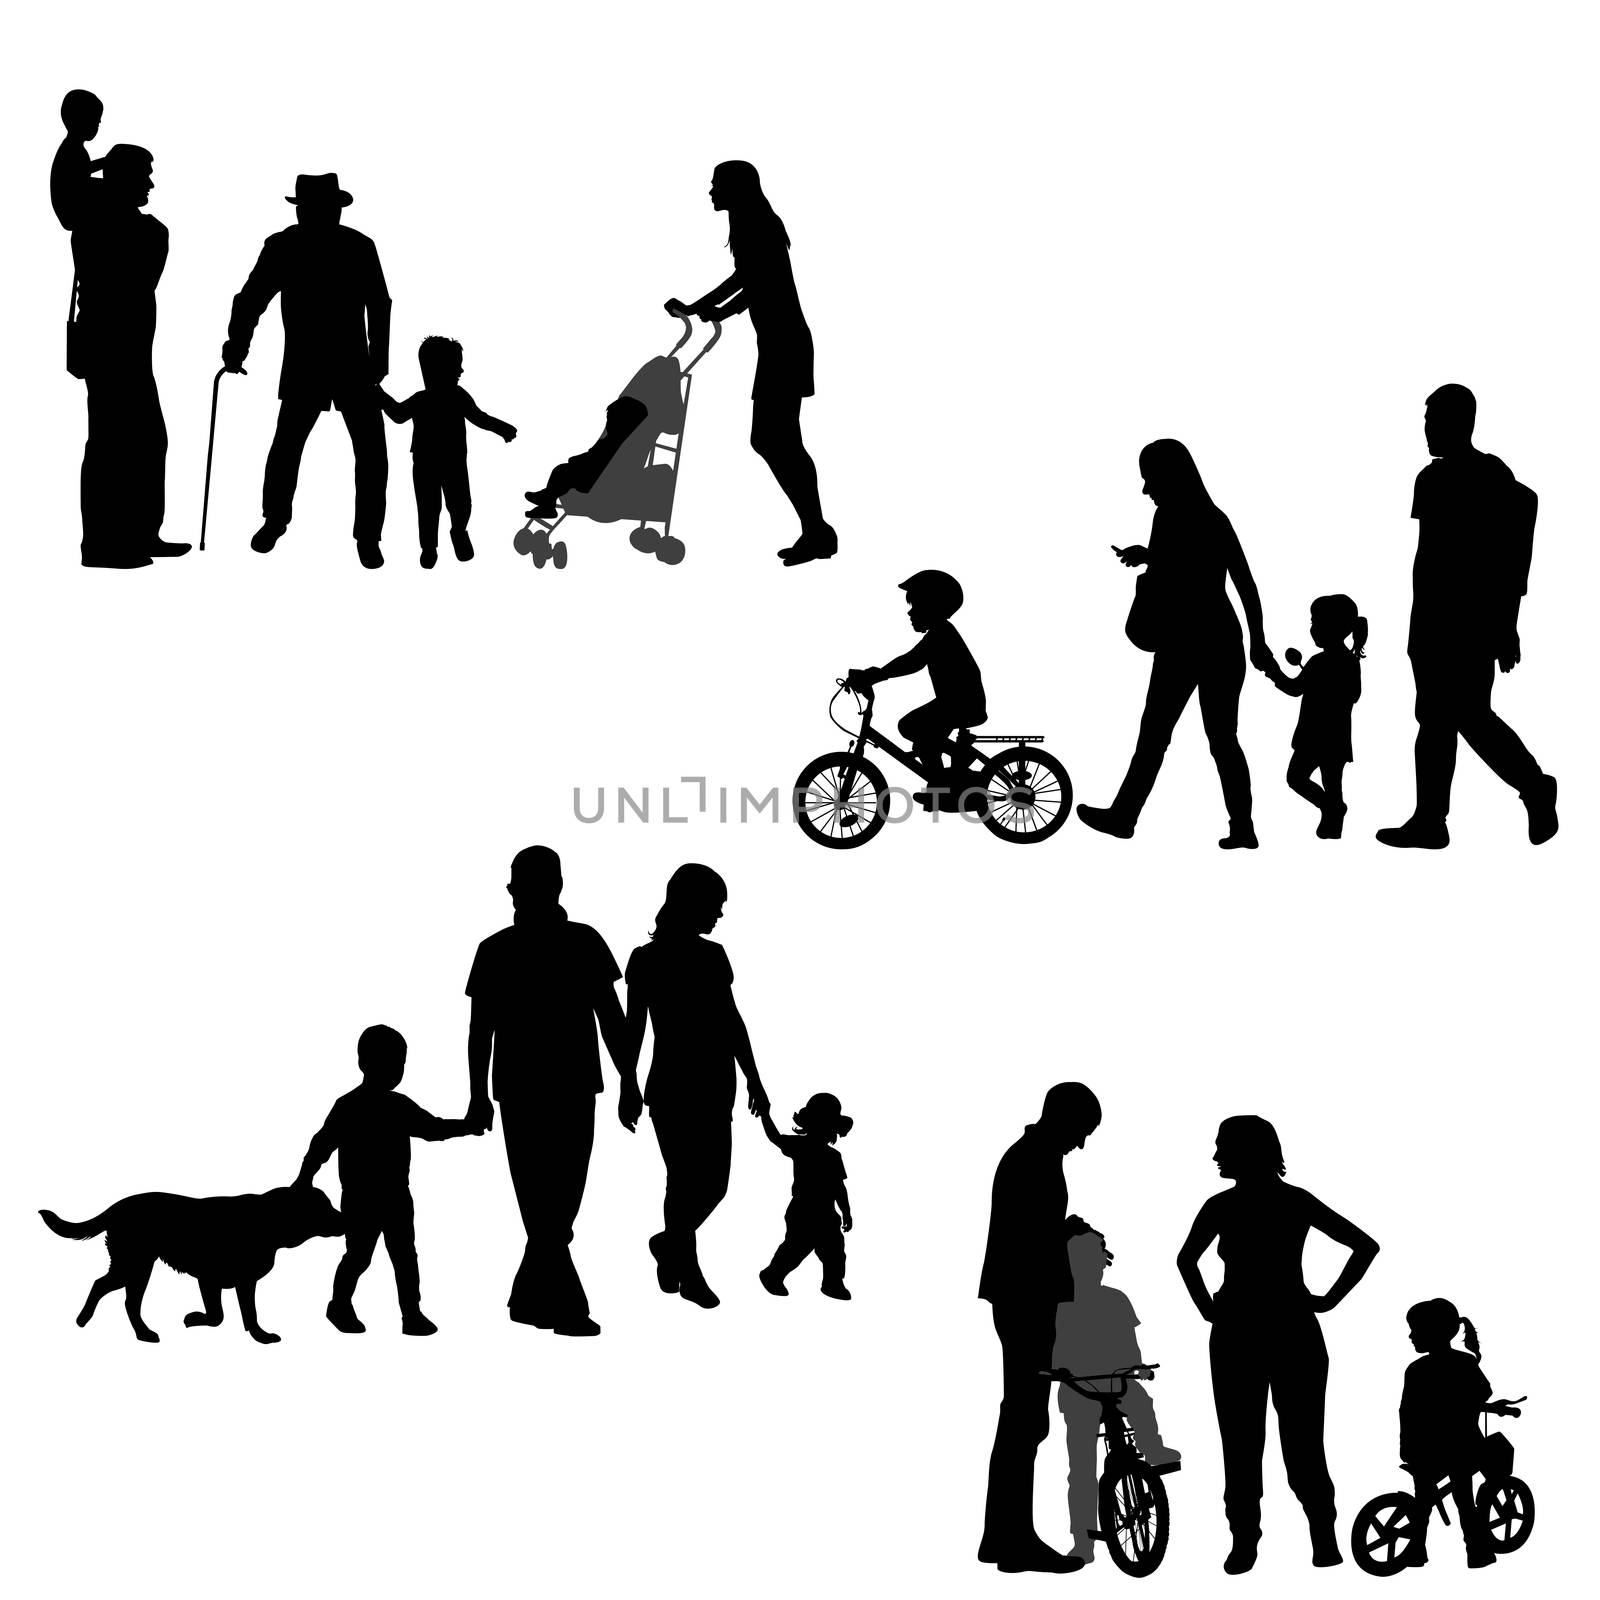 Families silhouettes set on white background by hibrida13